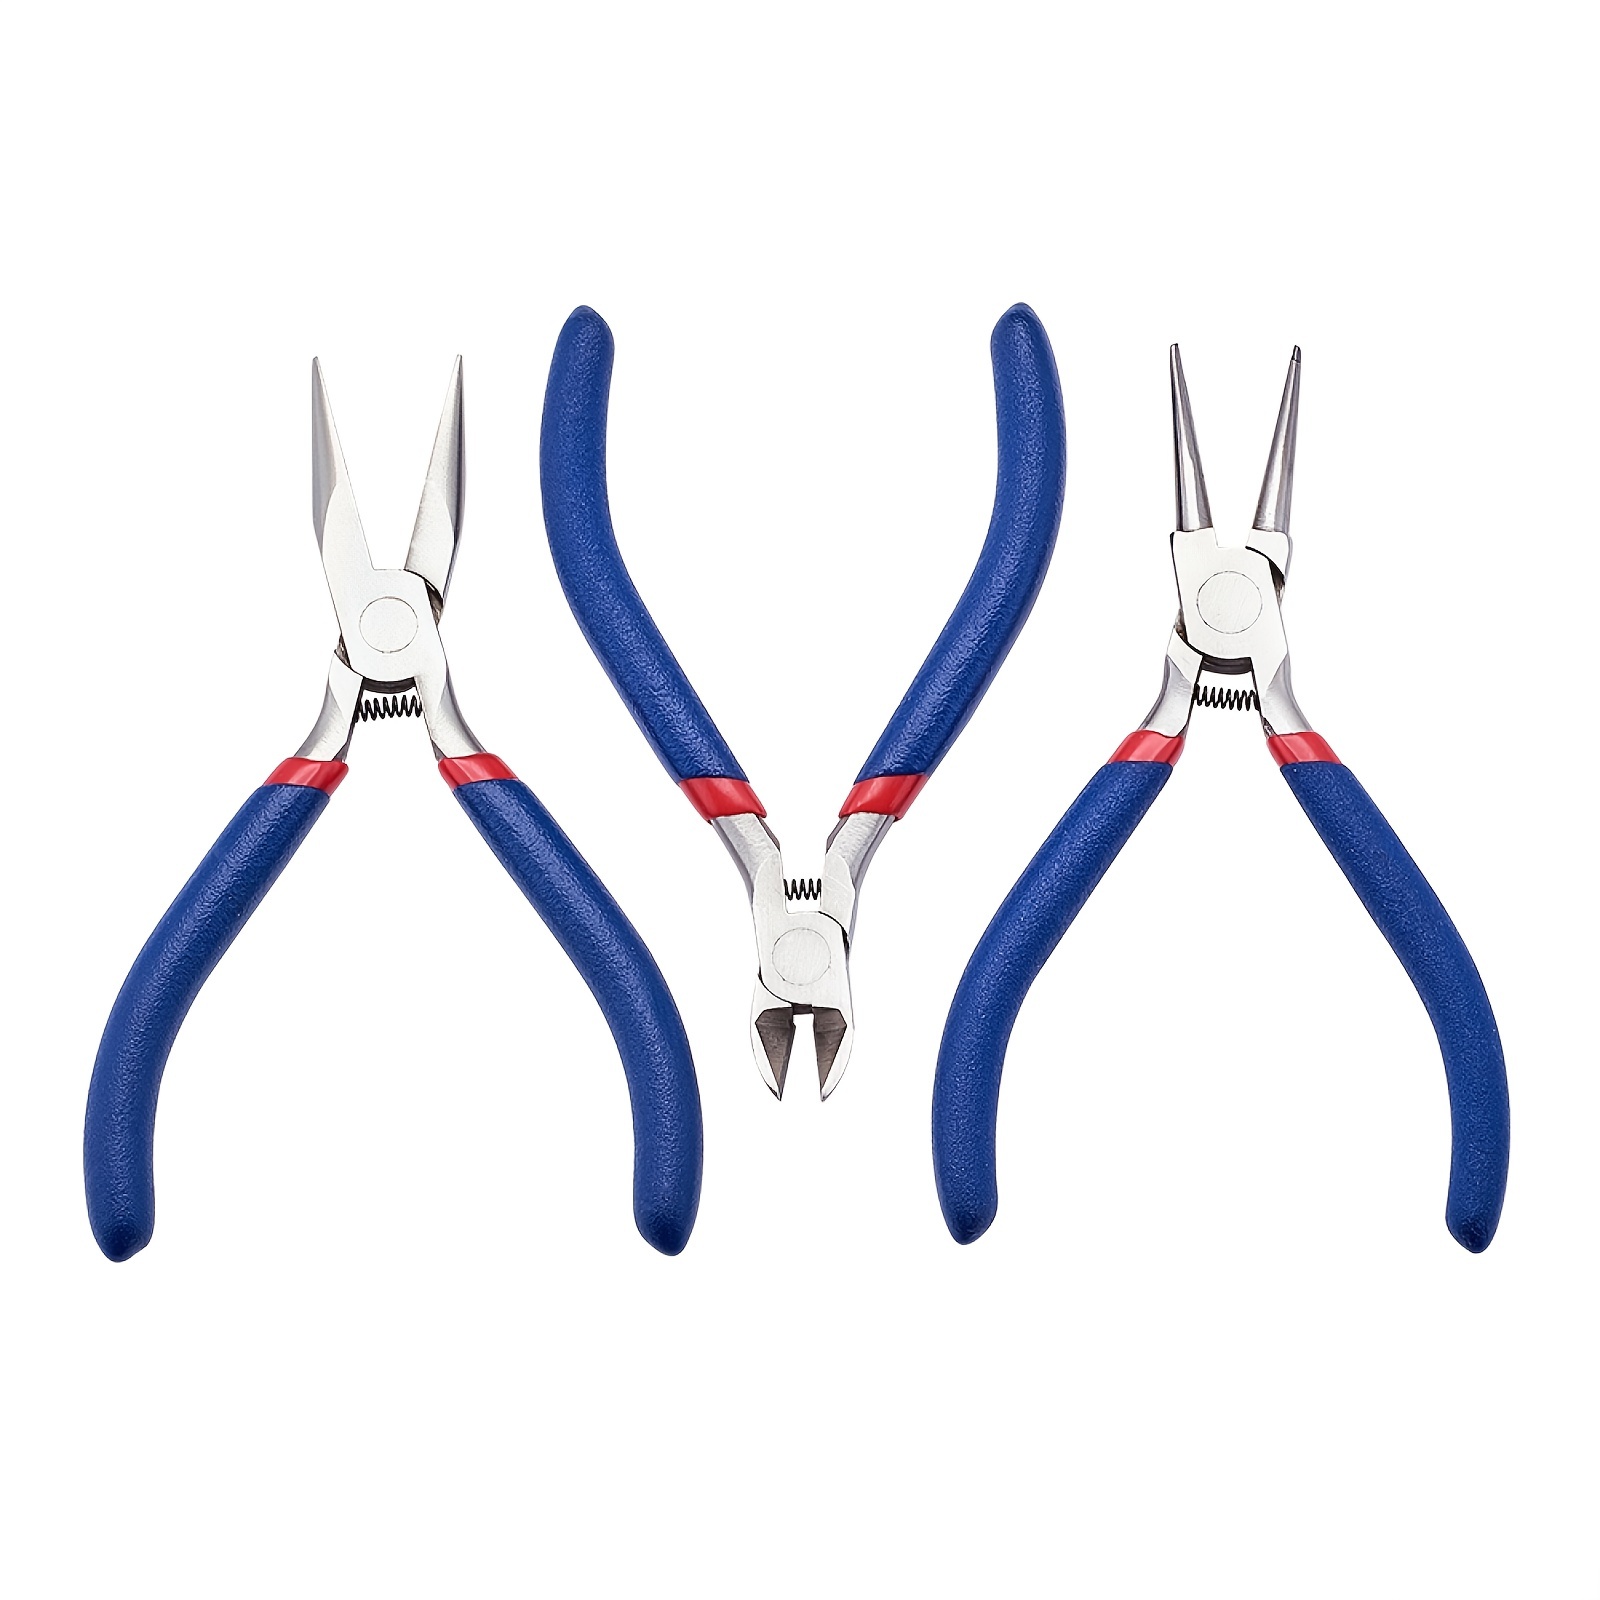 Jewelry Plier for Jewelry Making Supplies, #50 Steel(High Carbon Steel)  Short Chain Nose Pliers, Round Nose Pliers and Side Cutting Pliers,  Midnight Blue, 110~130x53mm